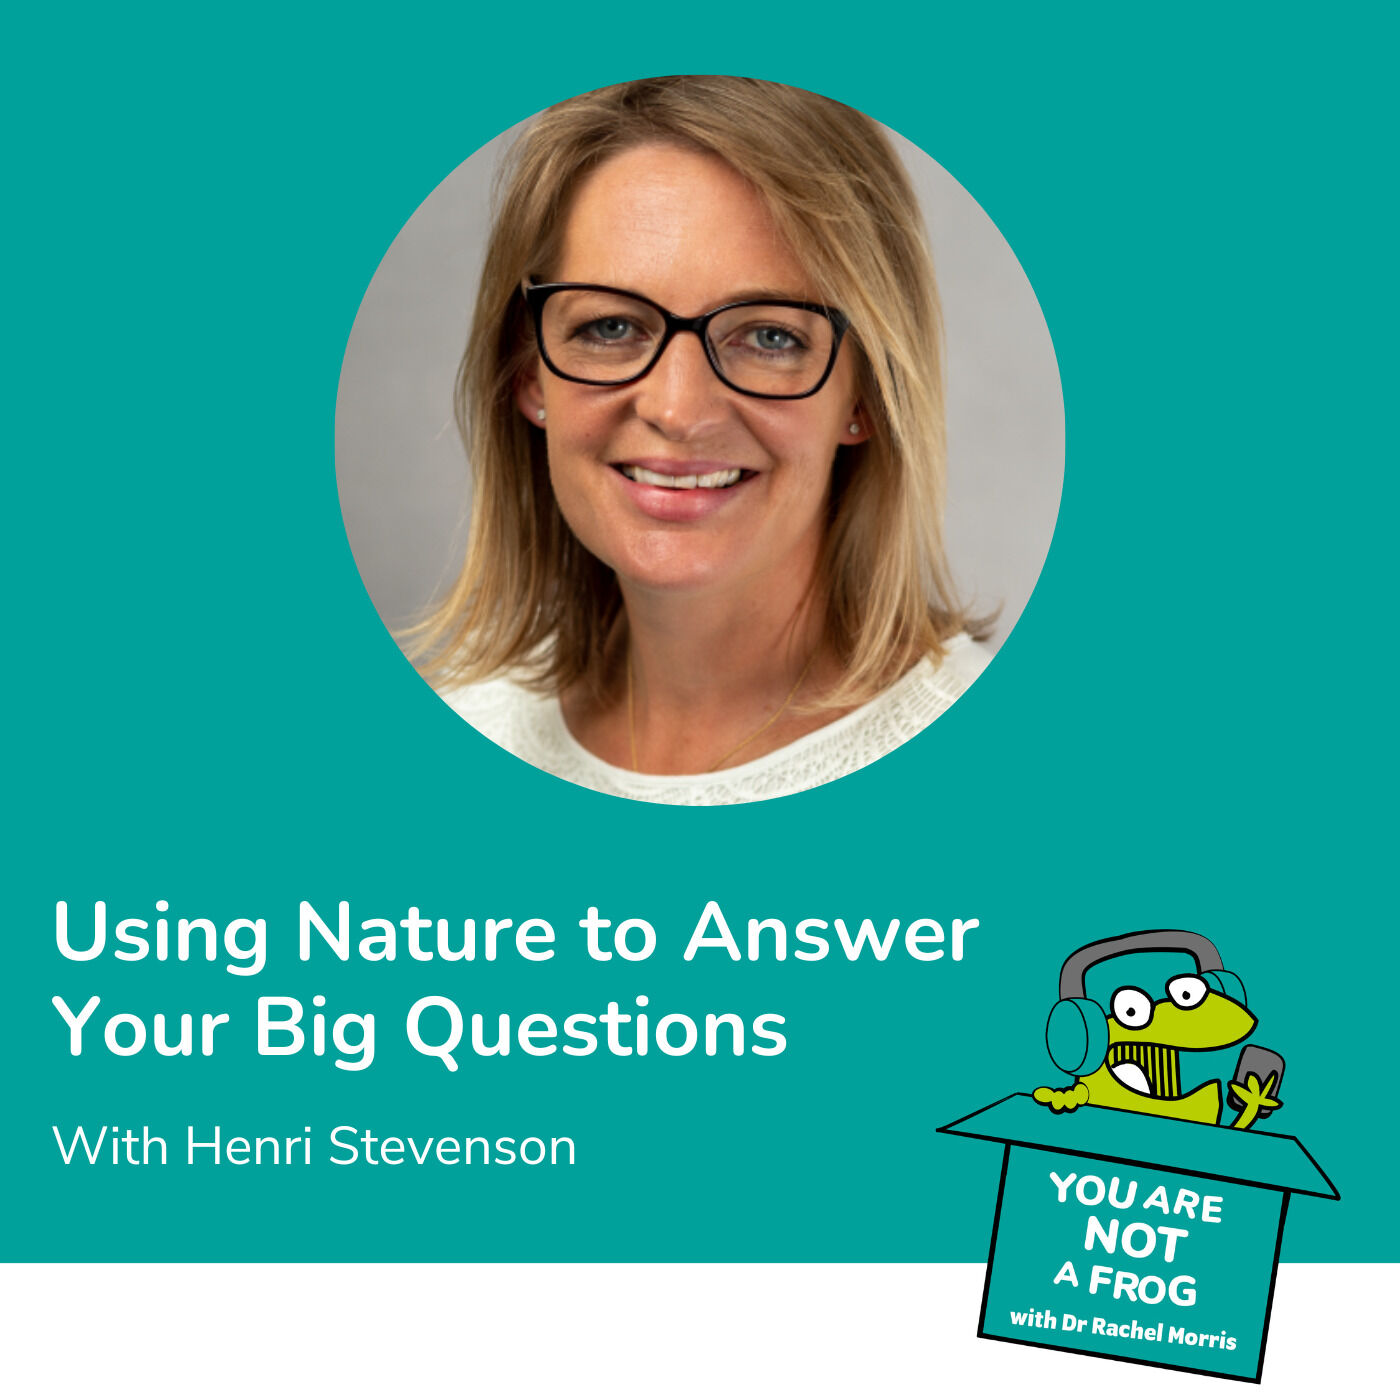 Using Nature to Answer Your Big Questions With Henri Stevenson